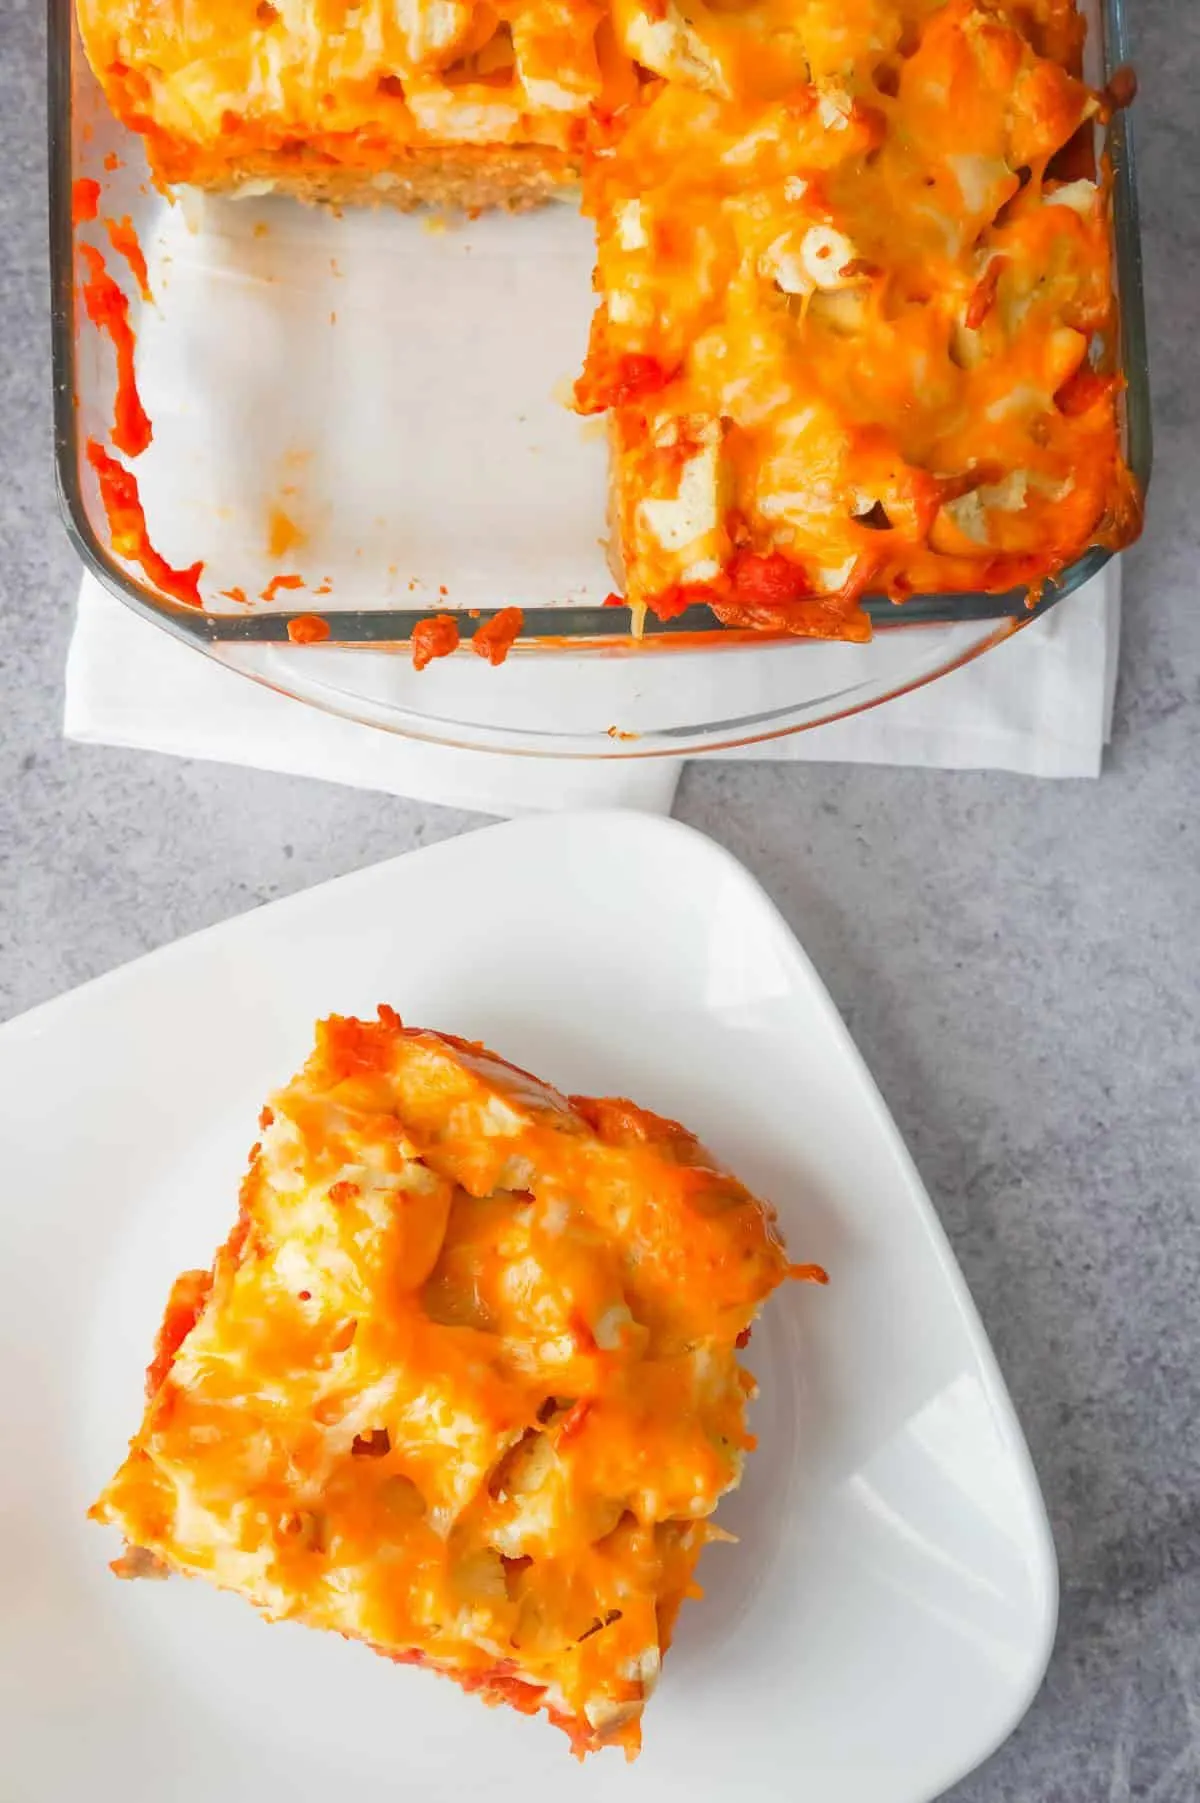 Easy Ground Chicken Casserole is a hearty ground chicken recipe topped with marinara sauce, garlic bagel chunks and shredded cheese.